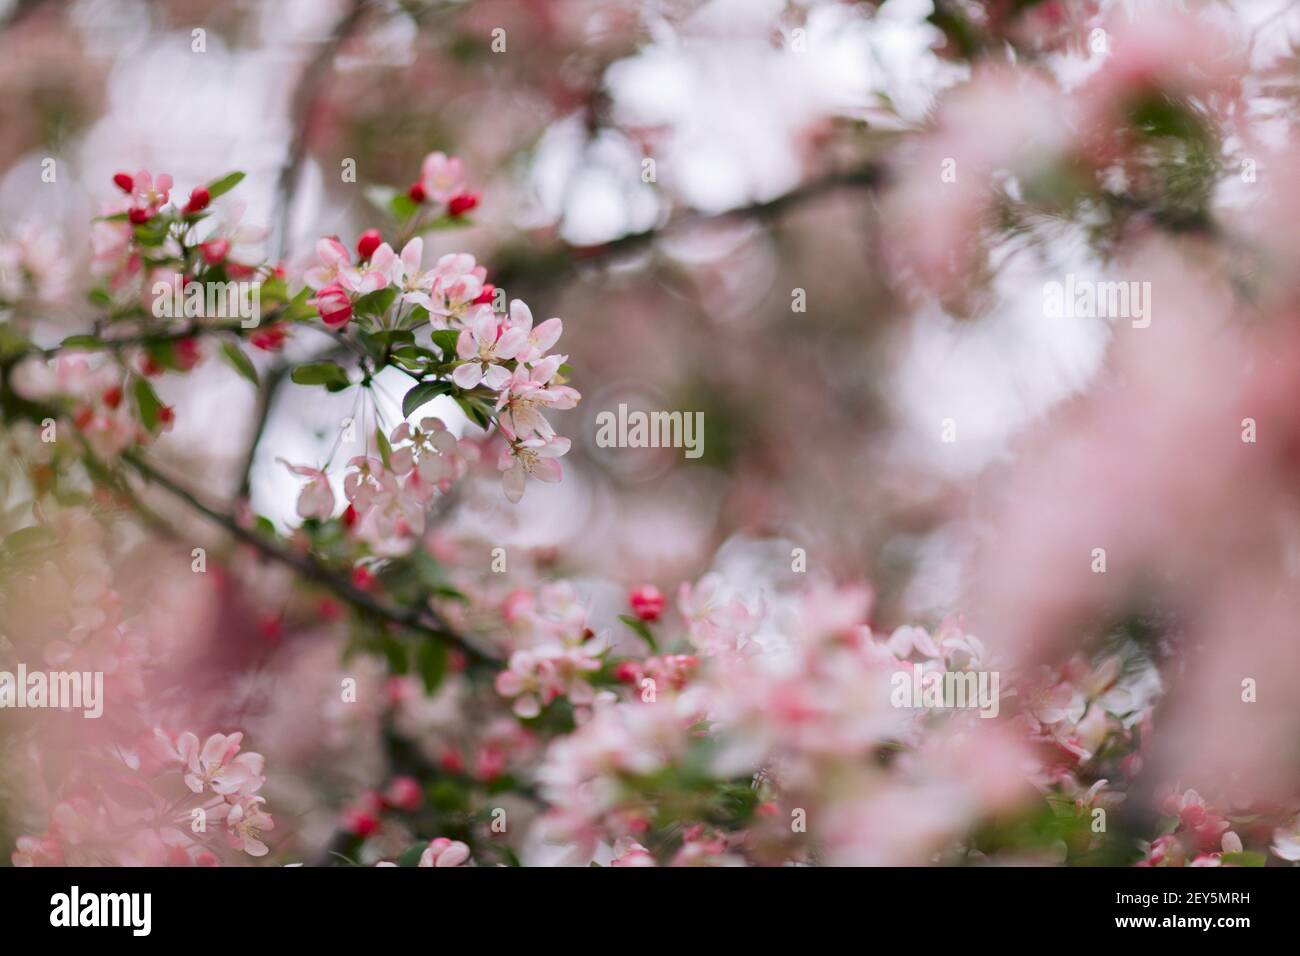 Light pink crabapple blossoms in springtime on a branch Stock Photo